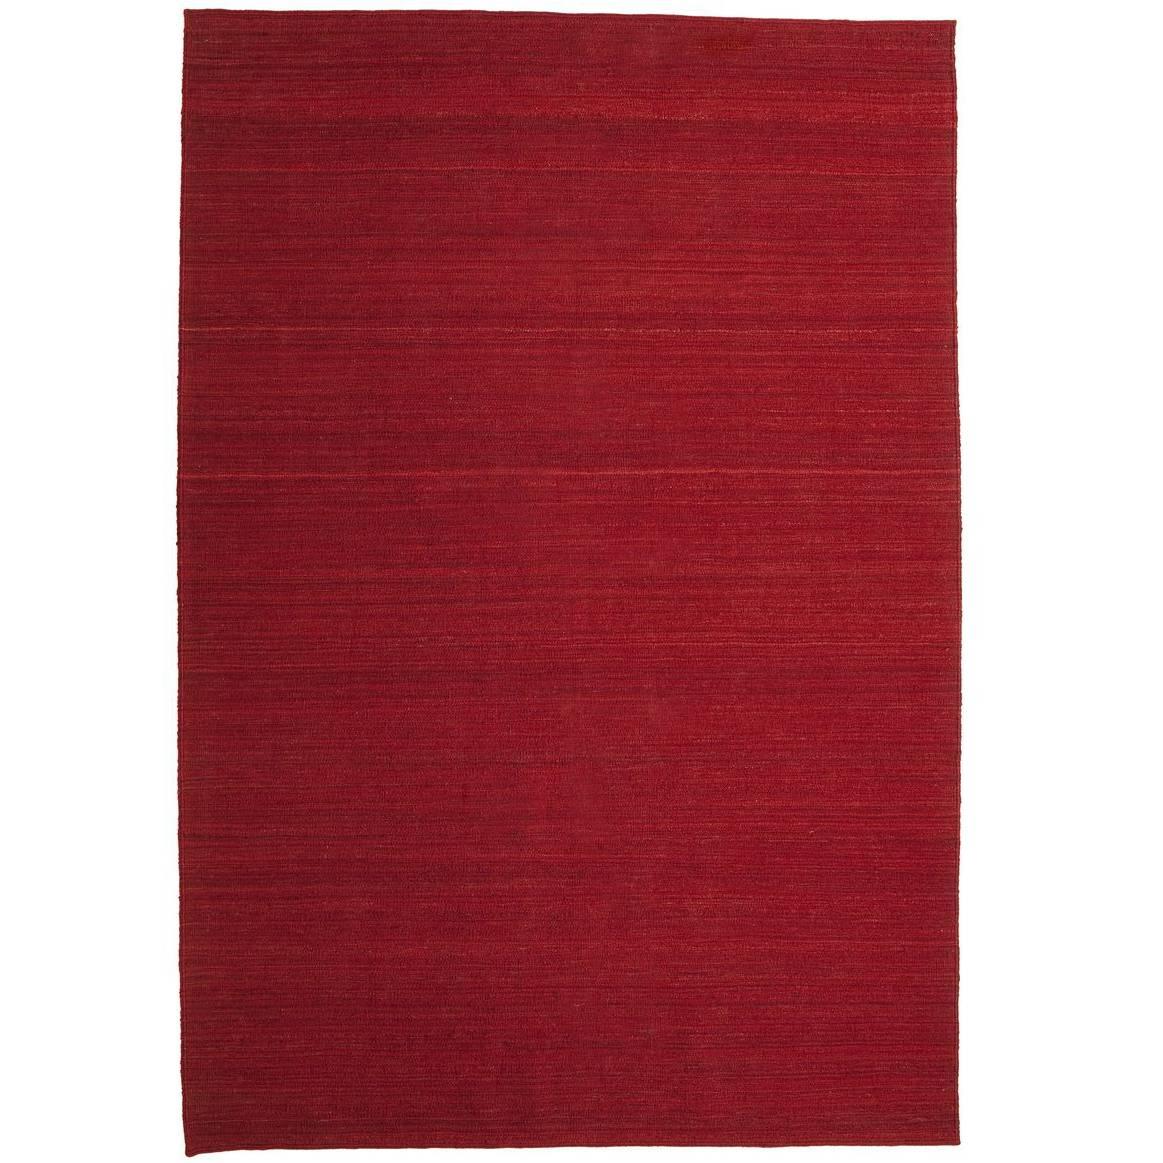 Nomad Deep Red Hand-Loomed Wool Rug by Nani Marquina & Ariadna Miquel, Medium